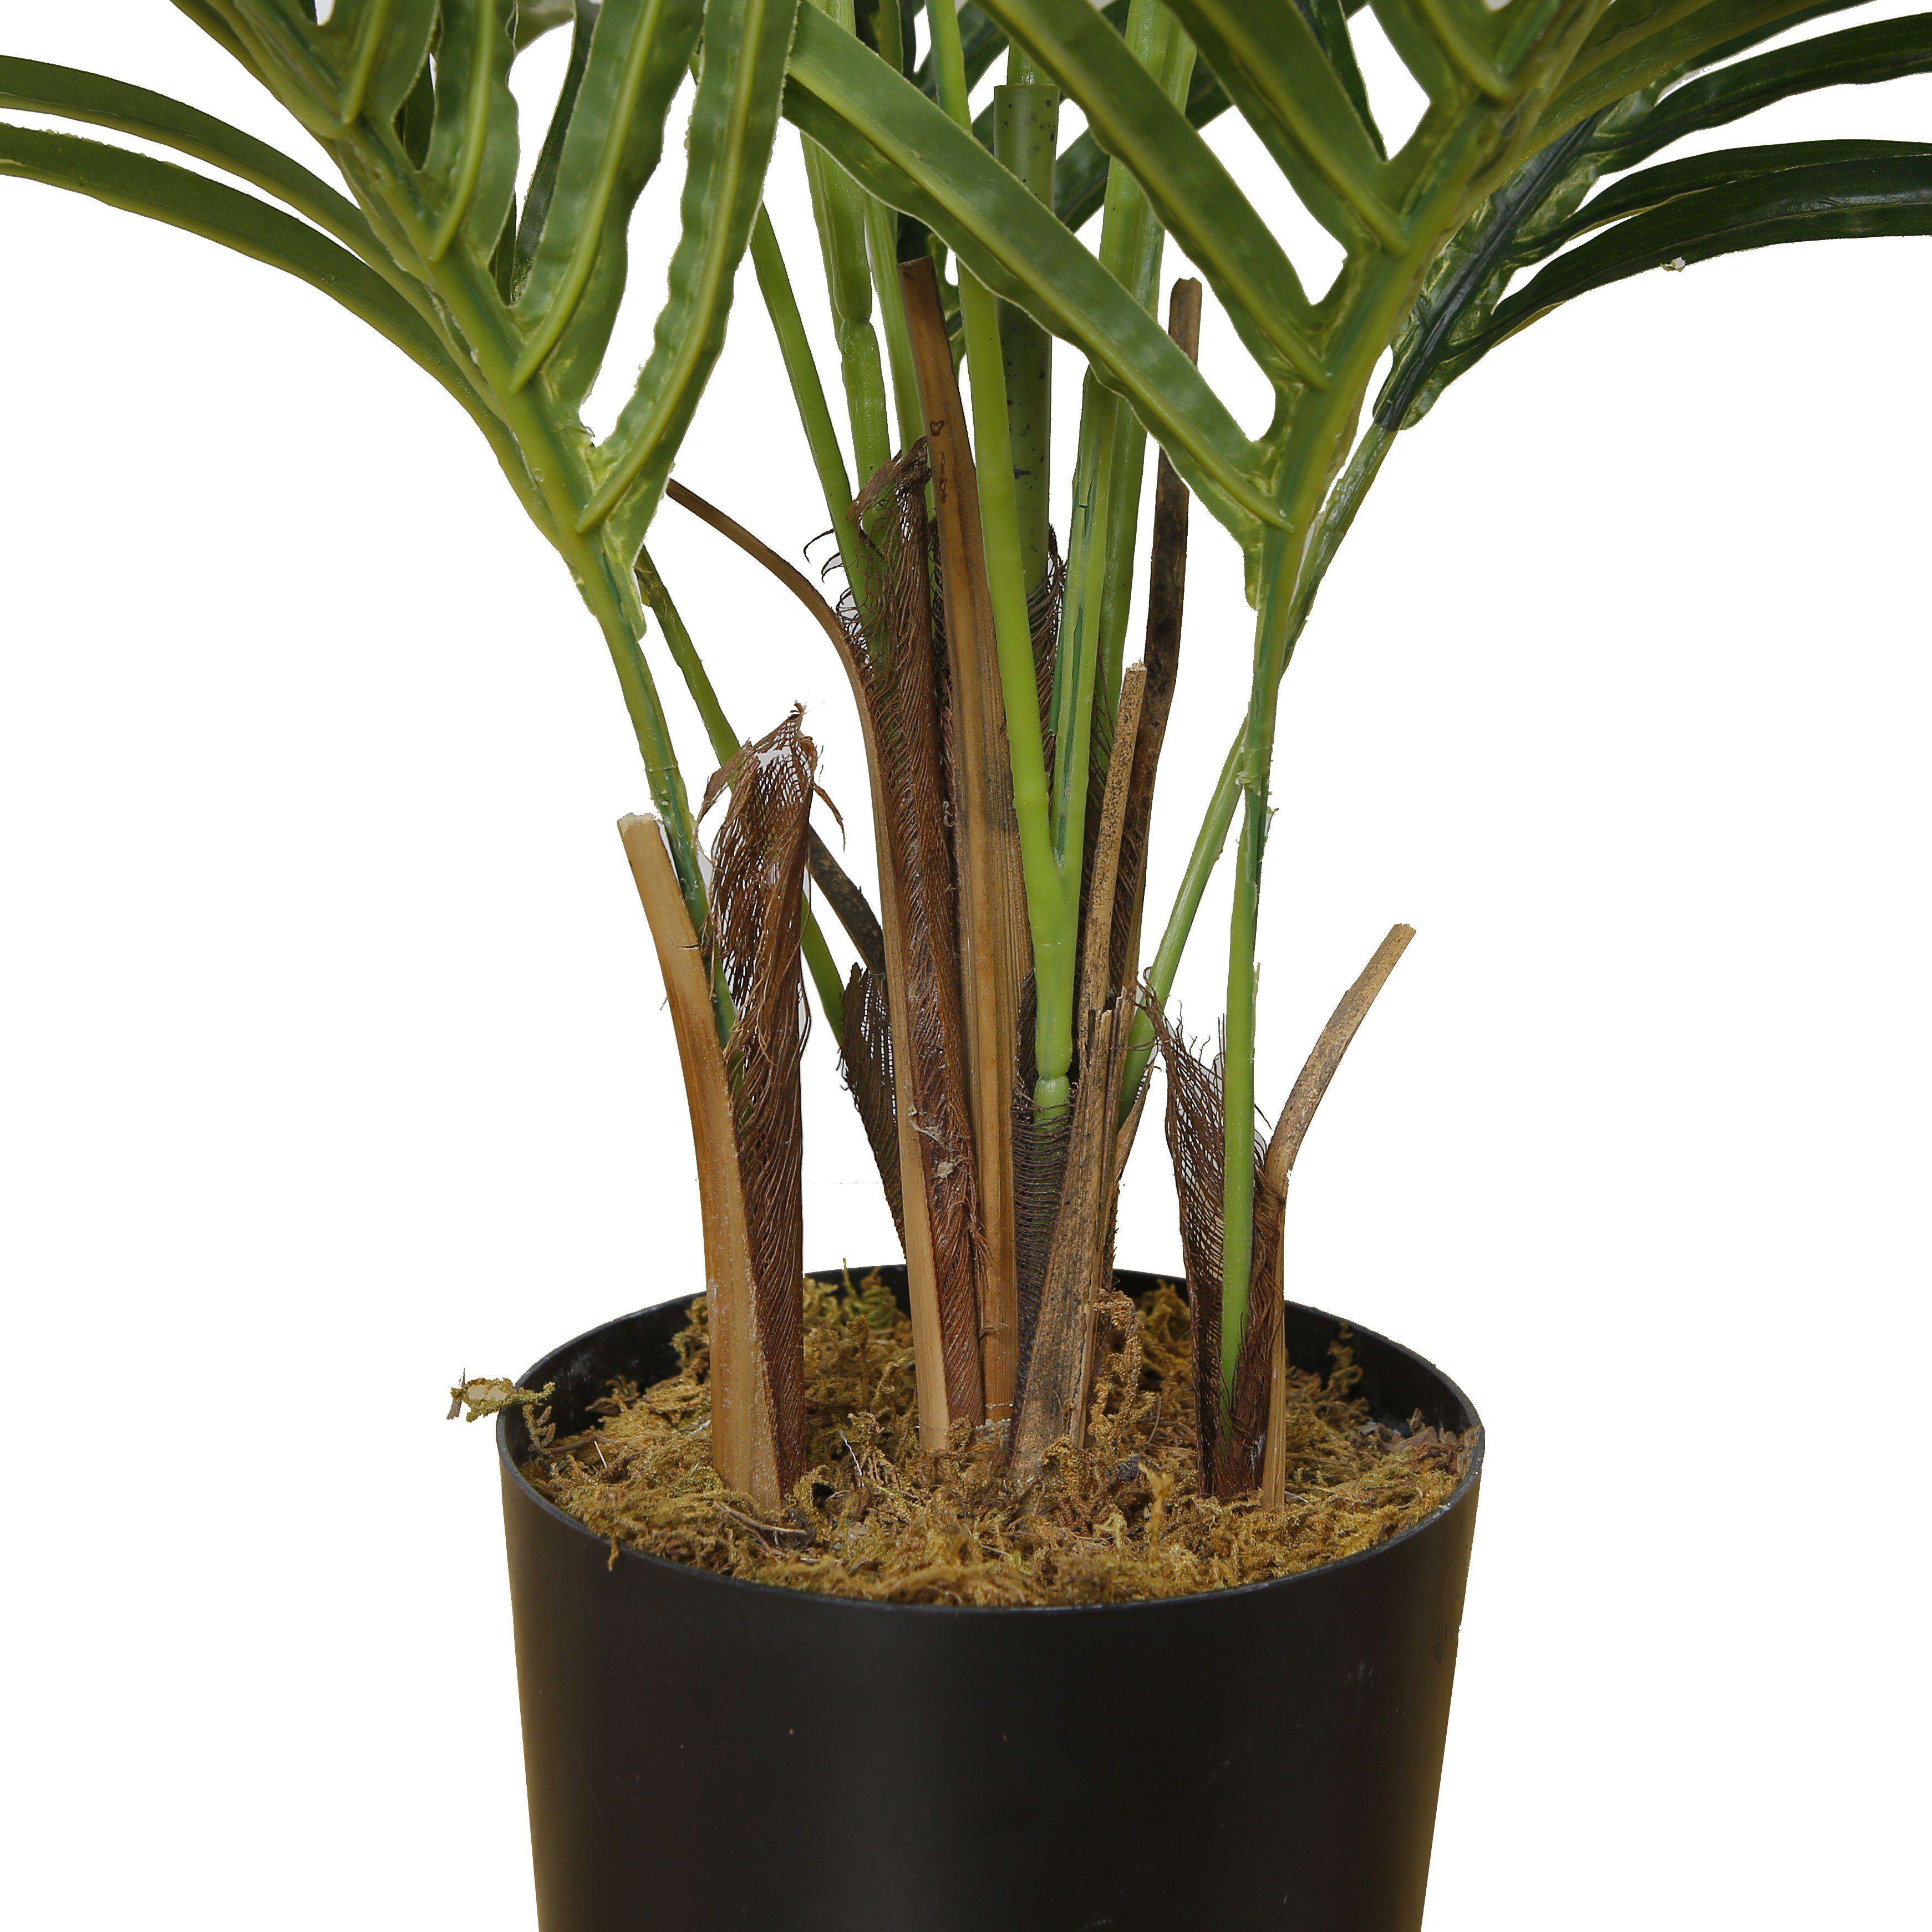 LOLO Artificial Hawaii Palm Potted Plant 3' ArtiPlanto